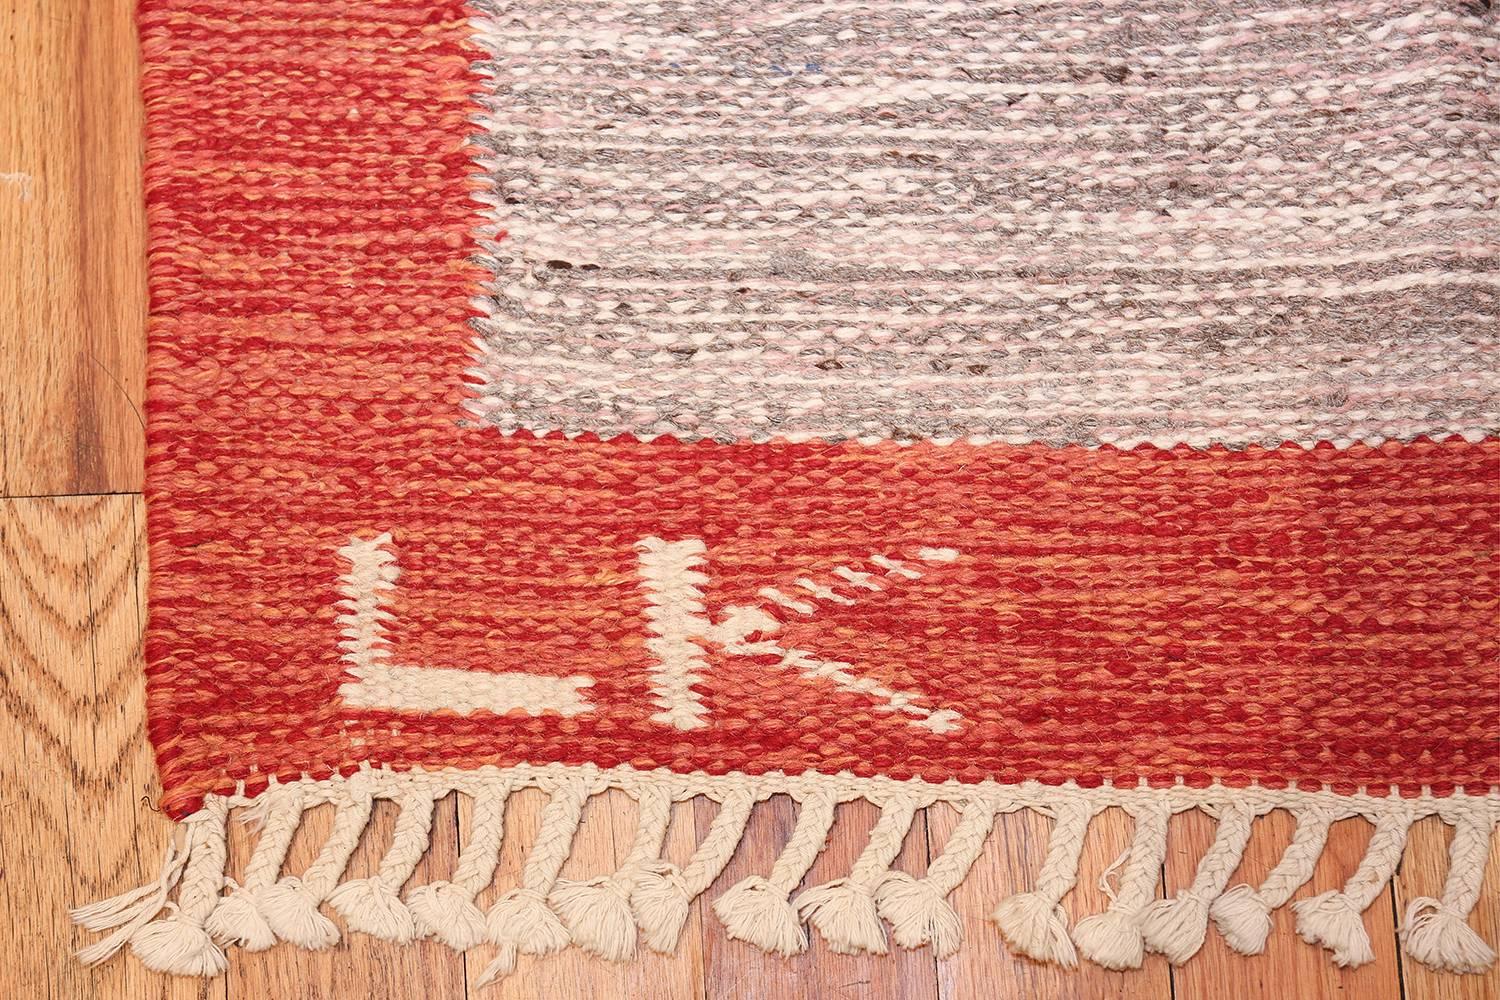 Hand-Woven Lovely and Vibrant Vintage Swedish Kilim. Size: 6 ft x 9 ft 9 in